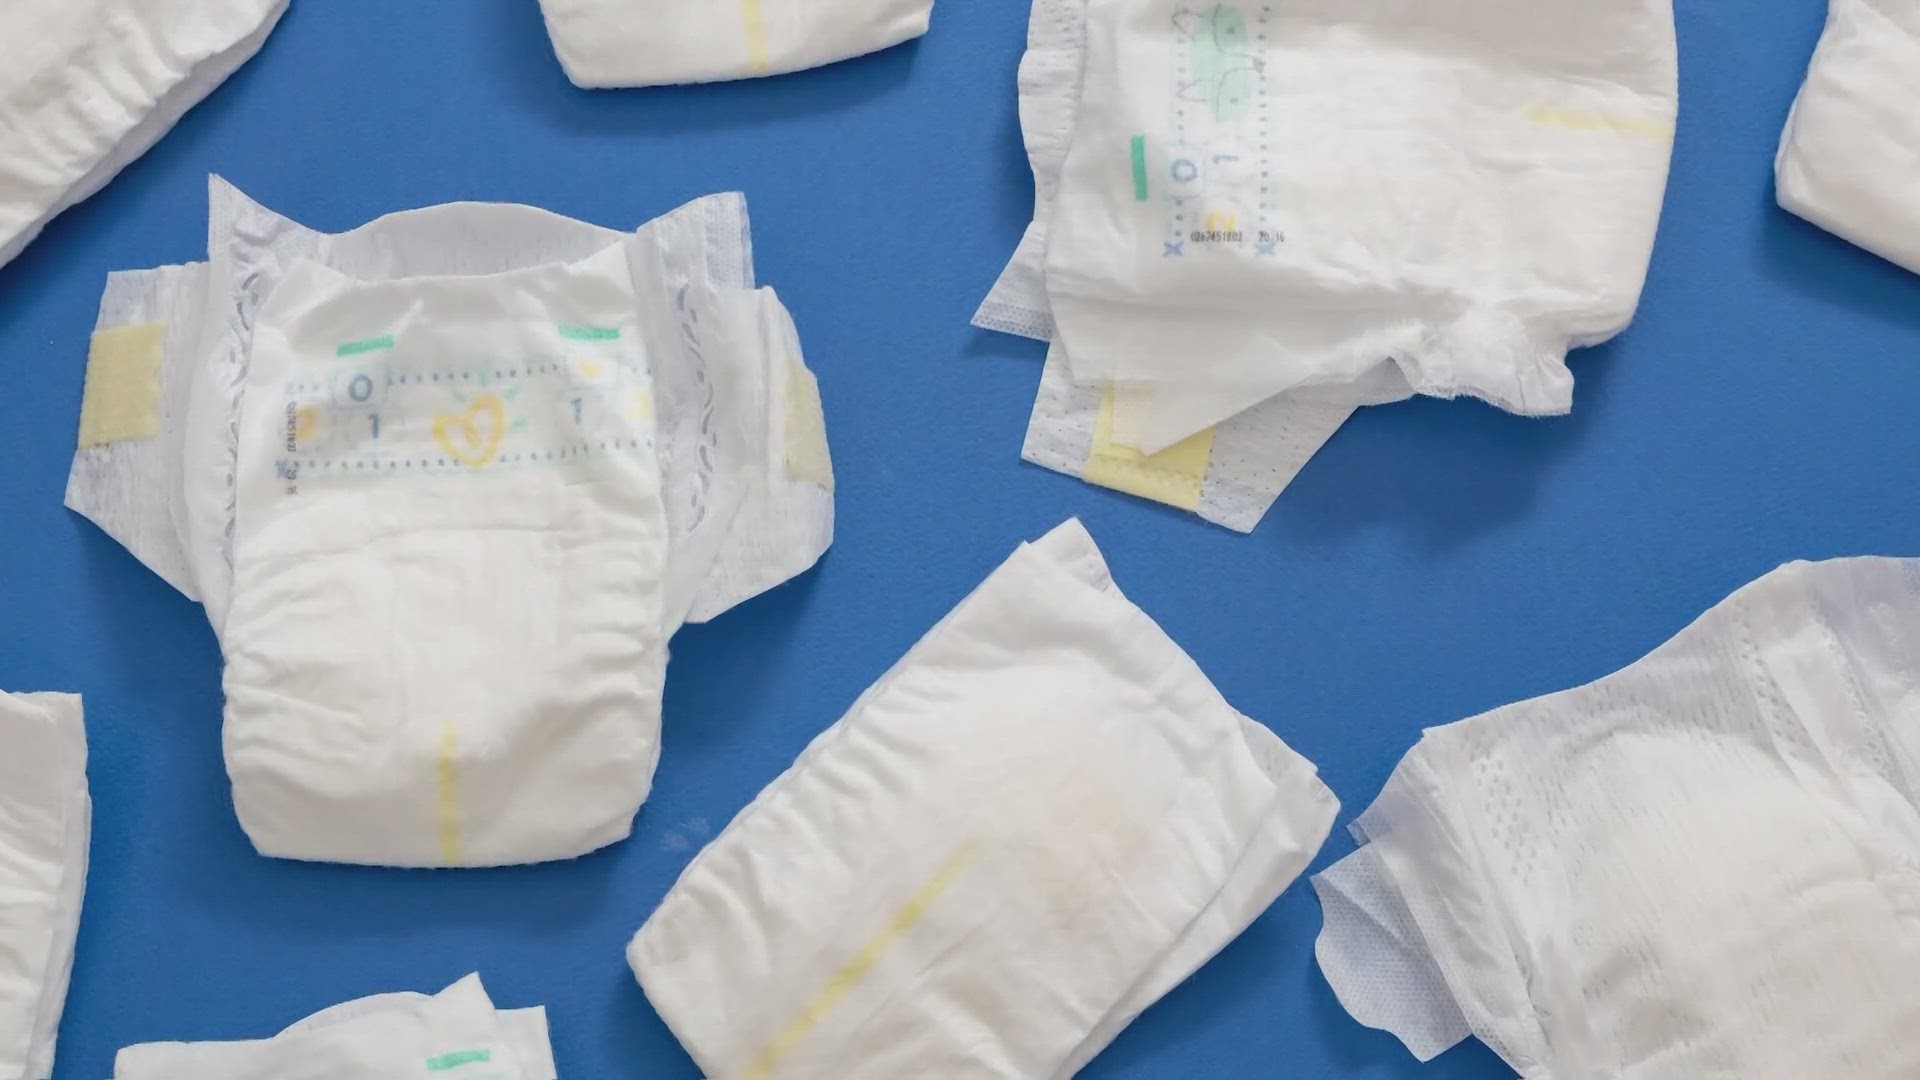 While some parents are deciding which diaper brand is best for their baby, others are turning to a tactic to get their babies out of diapers sooner.